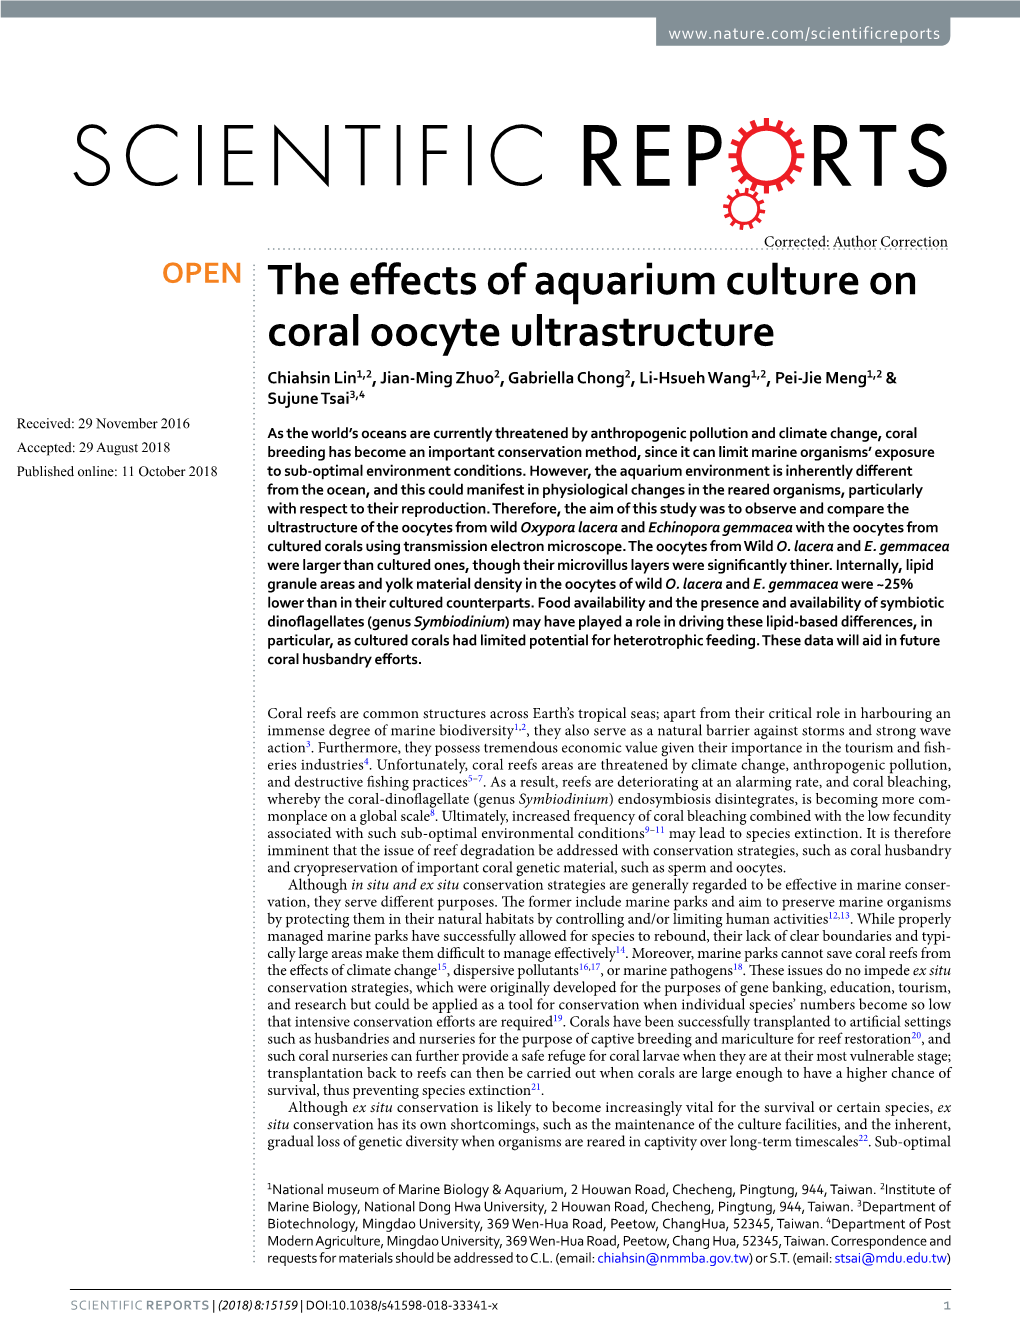 The Effects of Aquarium Culture on Coral Oocyte Ultrastructure